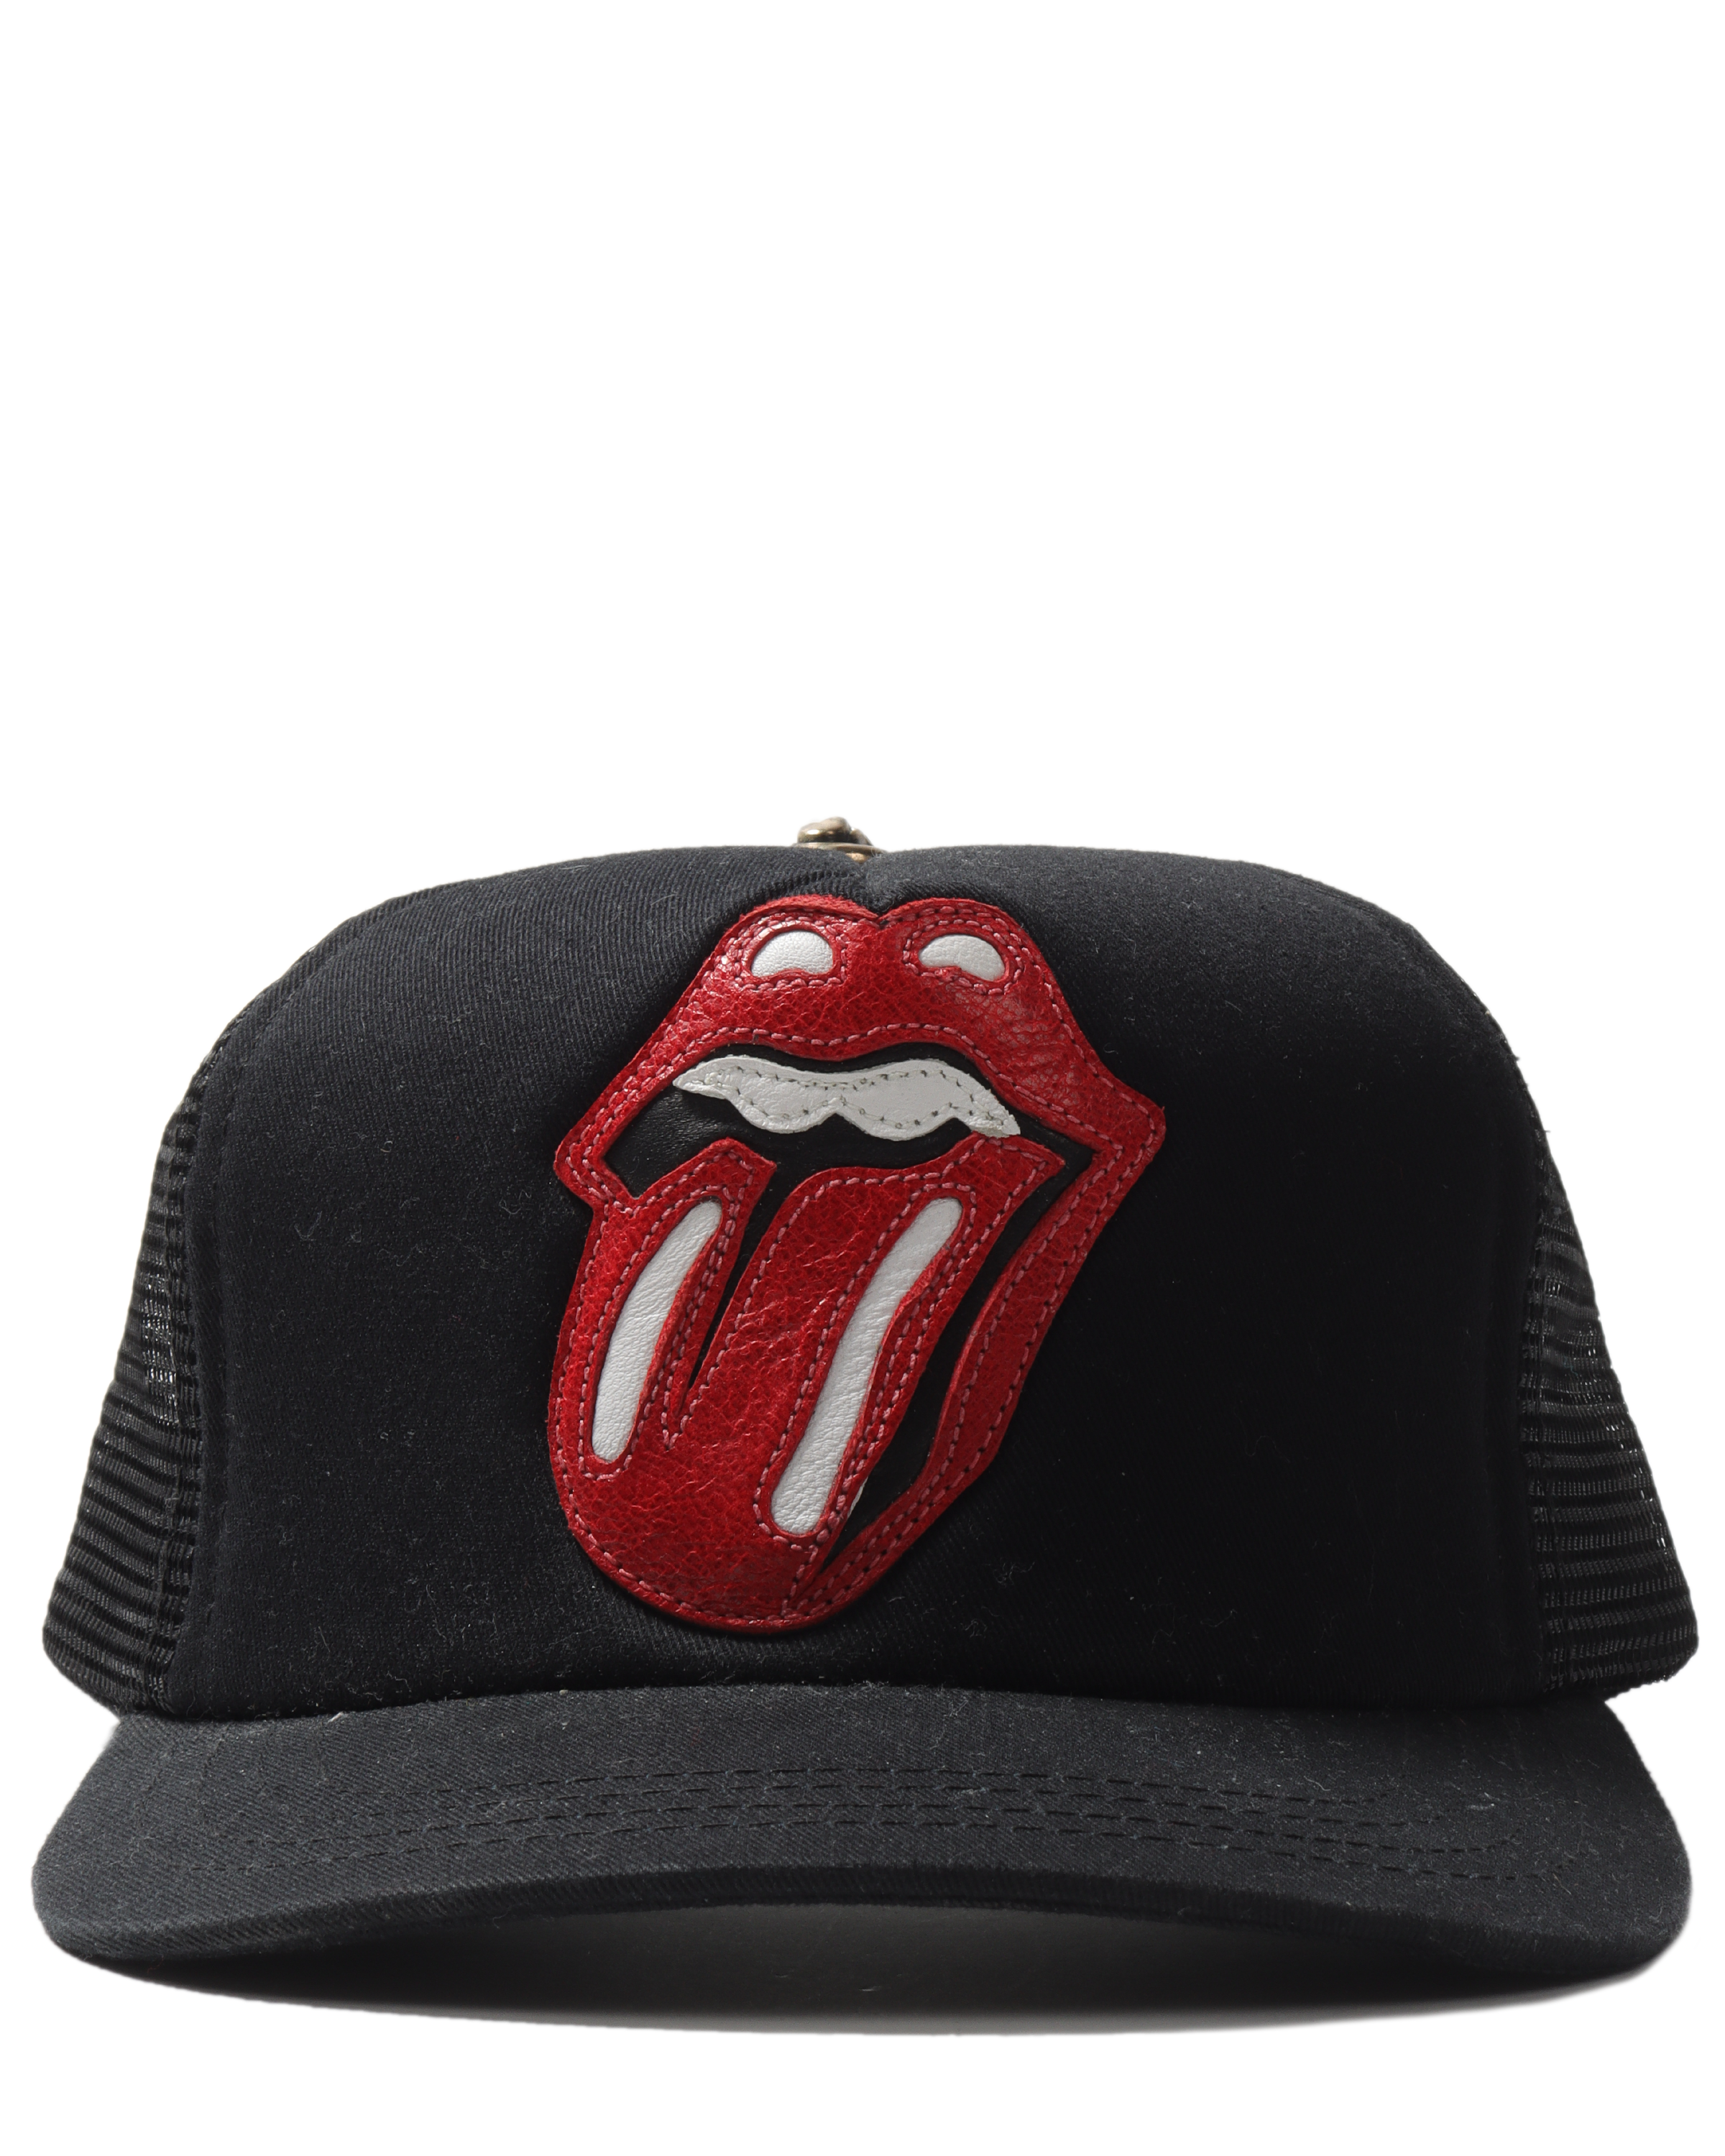 Leather "The Rolling Stones" Patch Trucker Hat